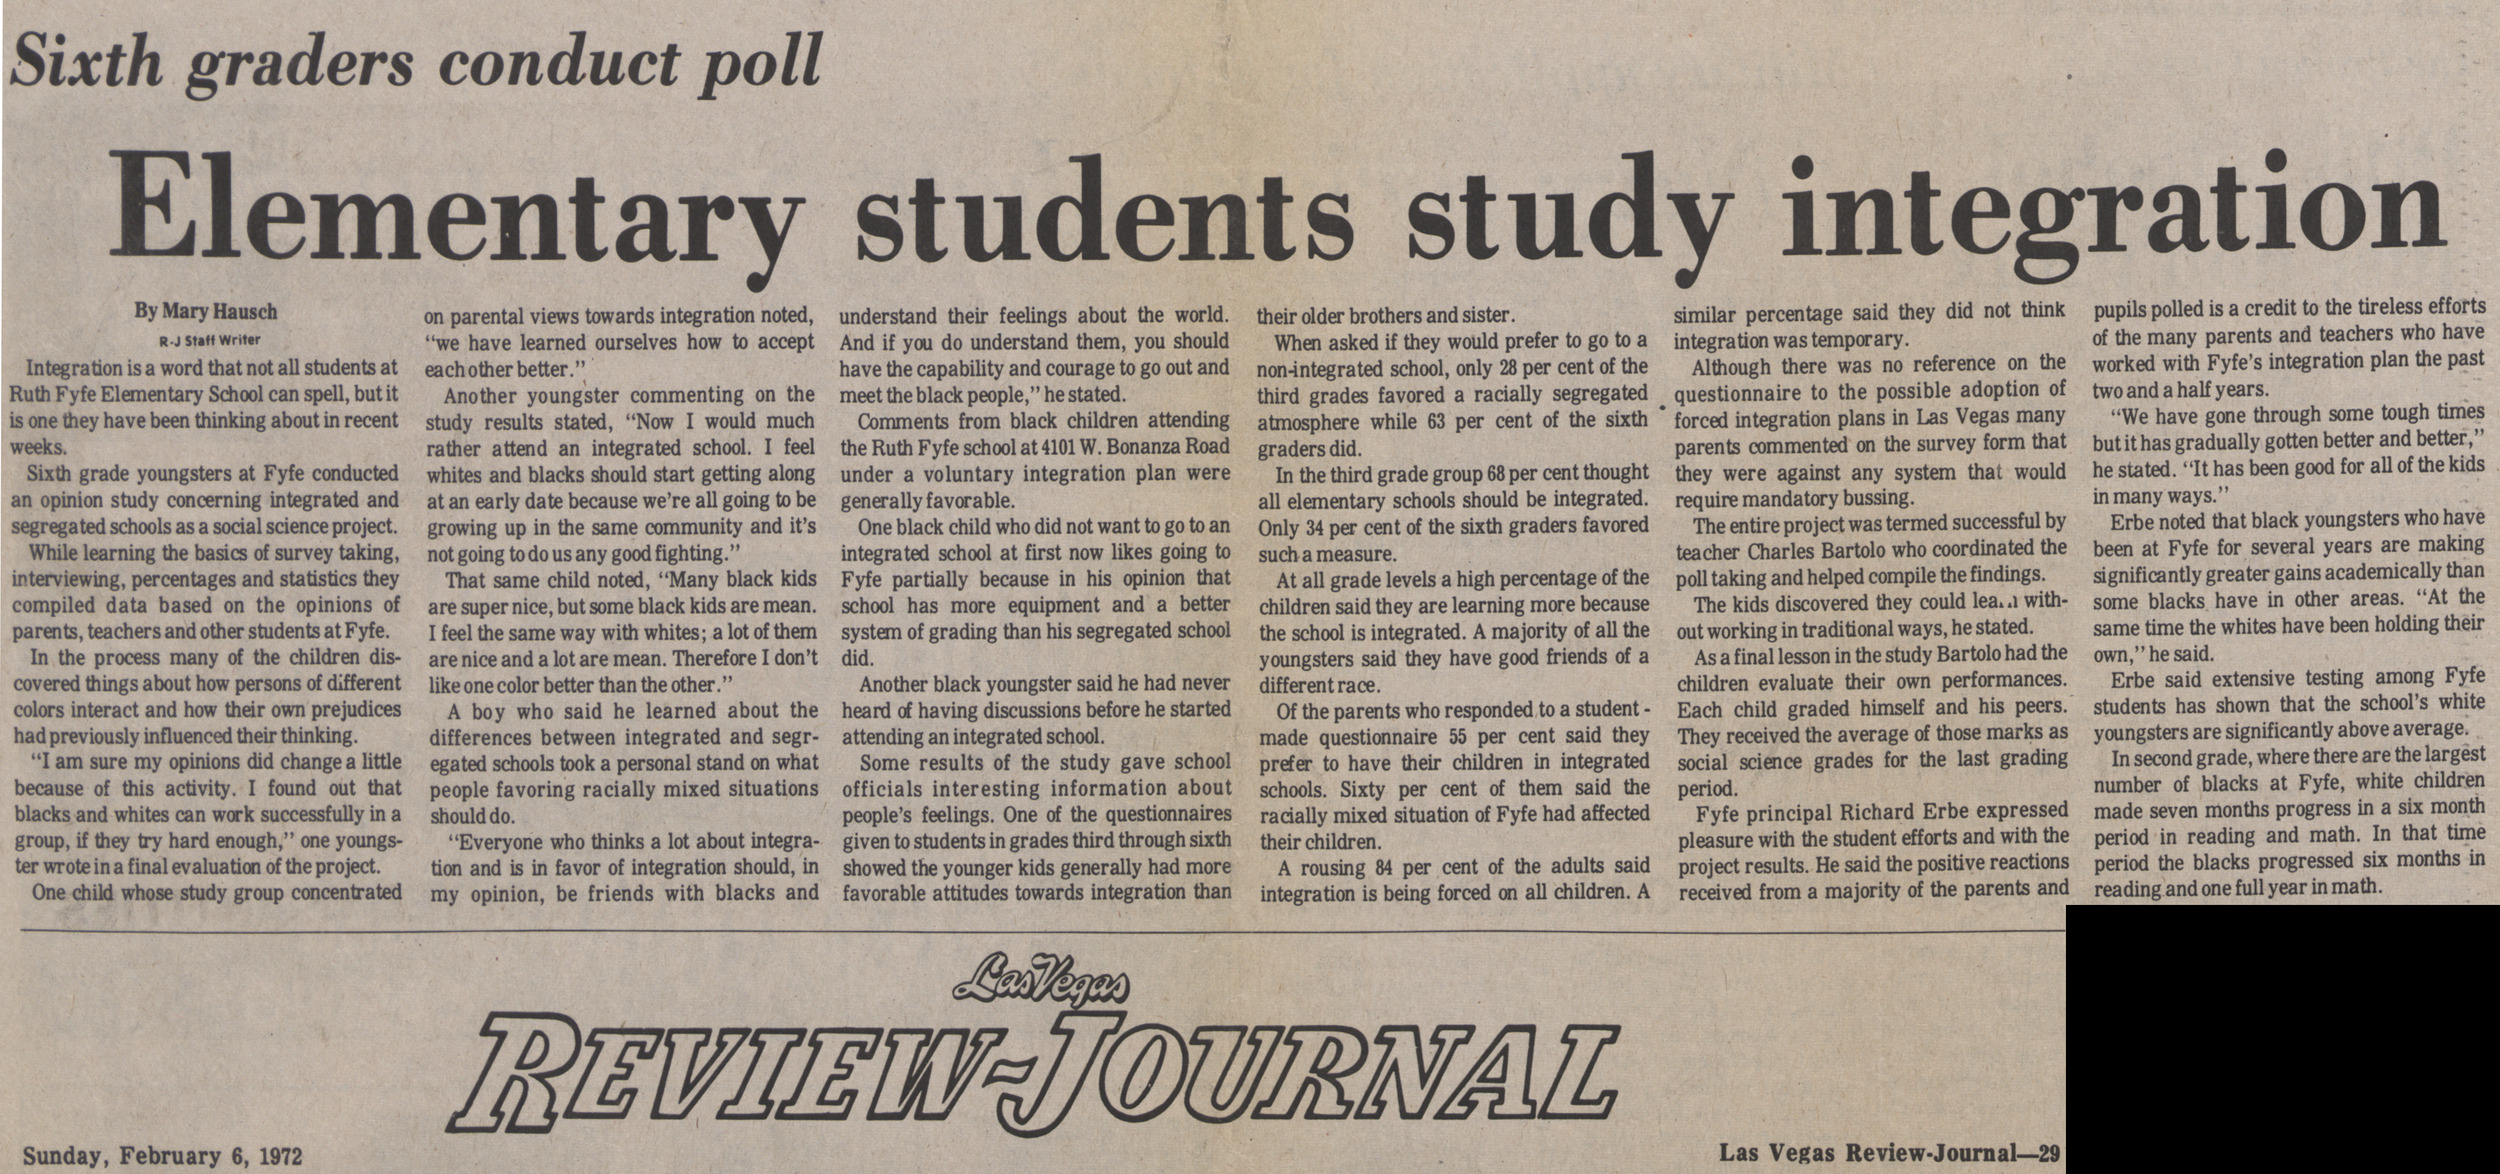 Newspaper clipping, Sixth graders conduct poll - Elementary students study integration, Las Vegas Review-Journal, February 6, 1972